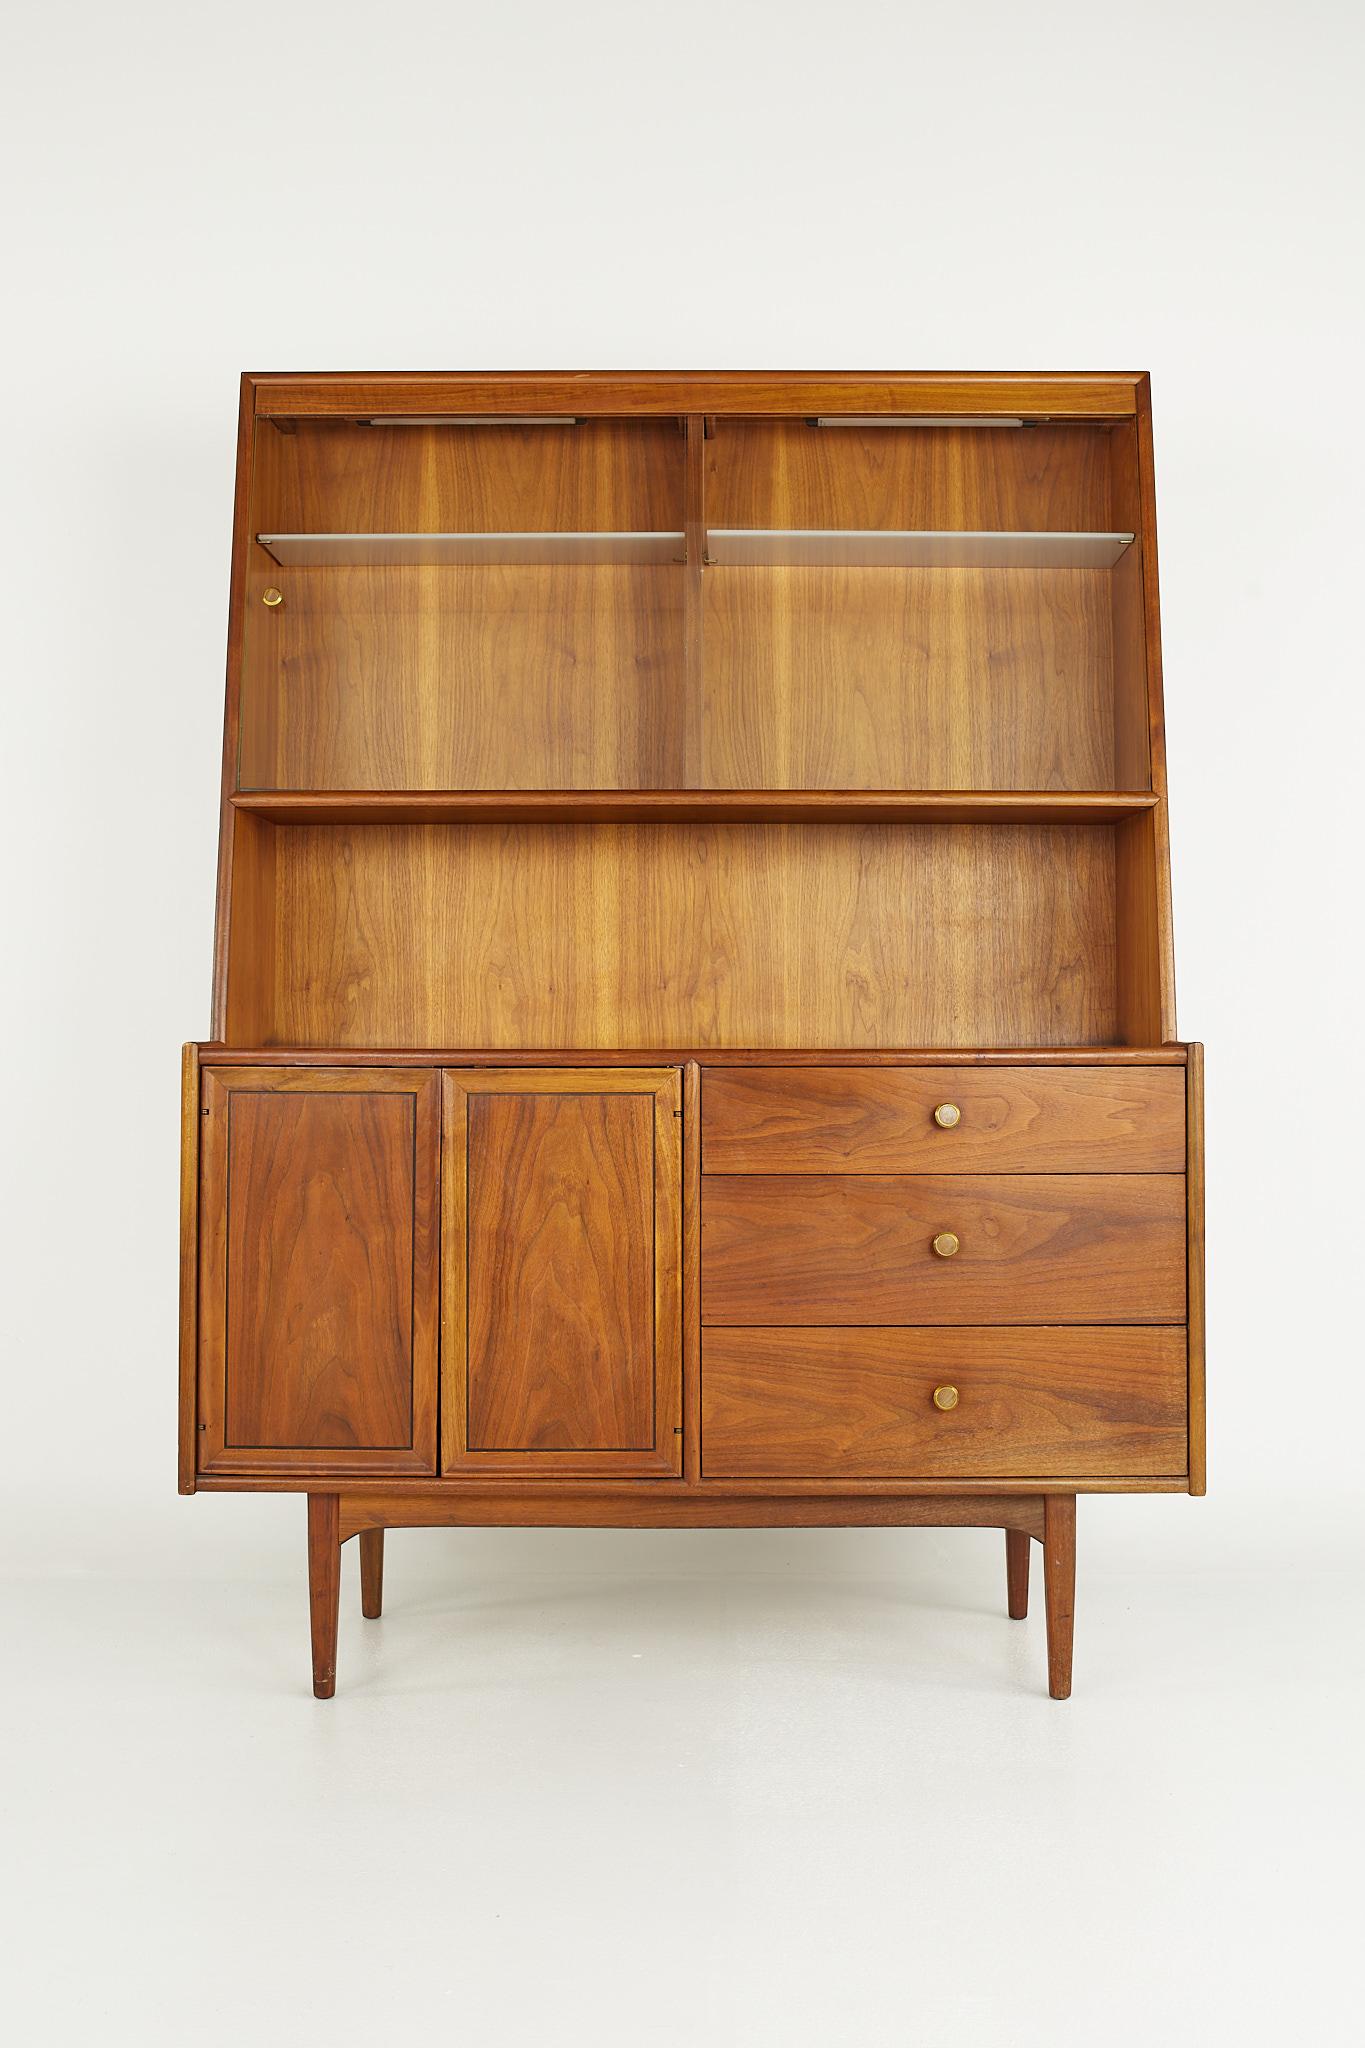 Kipp Stewart for Drexel mid century walnut china cabinet

China cabinet measures: 48.5 wide x 20 deep x 67 inches high 

?All pieces of furniture can be had in what we call restored vintage condition. That means the piece is restored upon